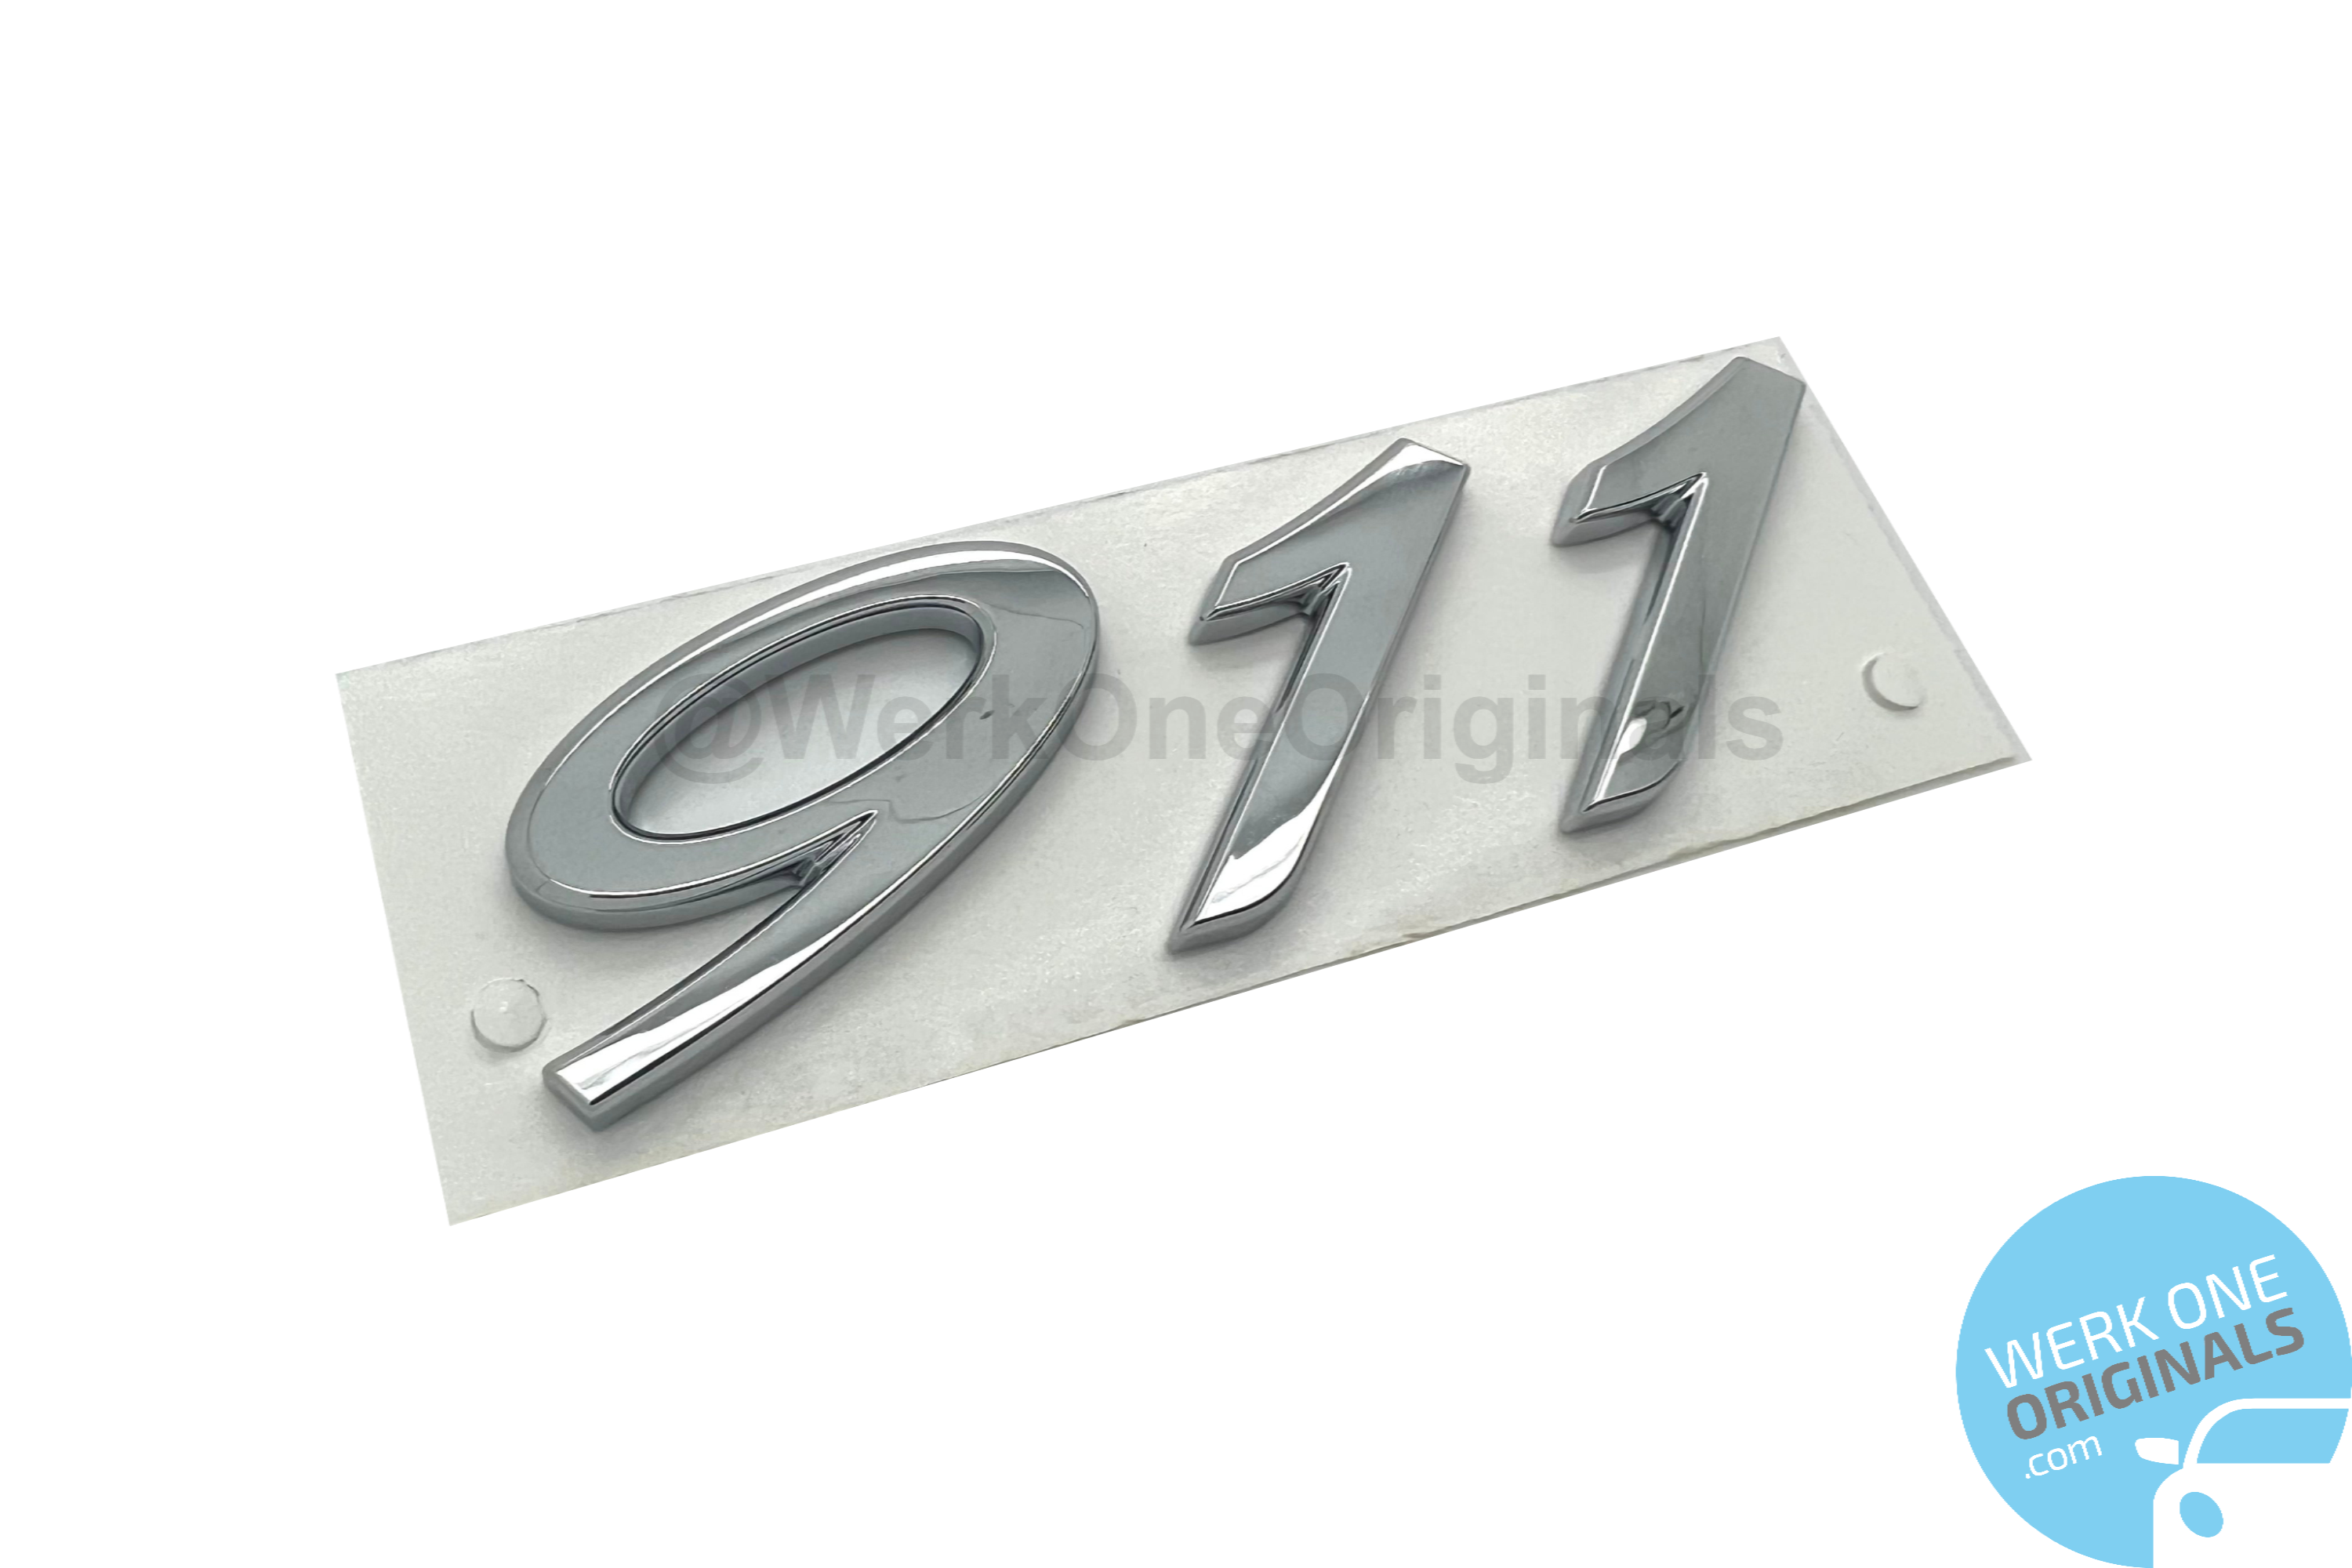 Porsche Official '911' Rear Badge Decal in Chrome Silver for 911 Type 993 Models